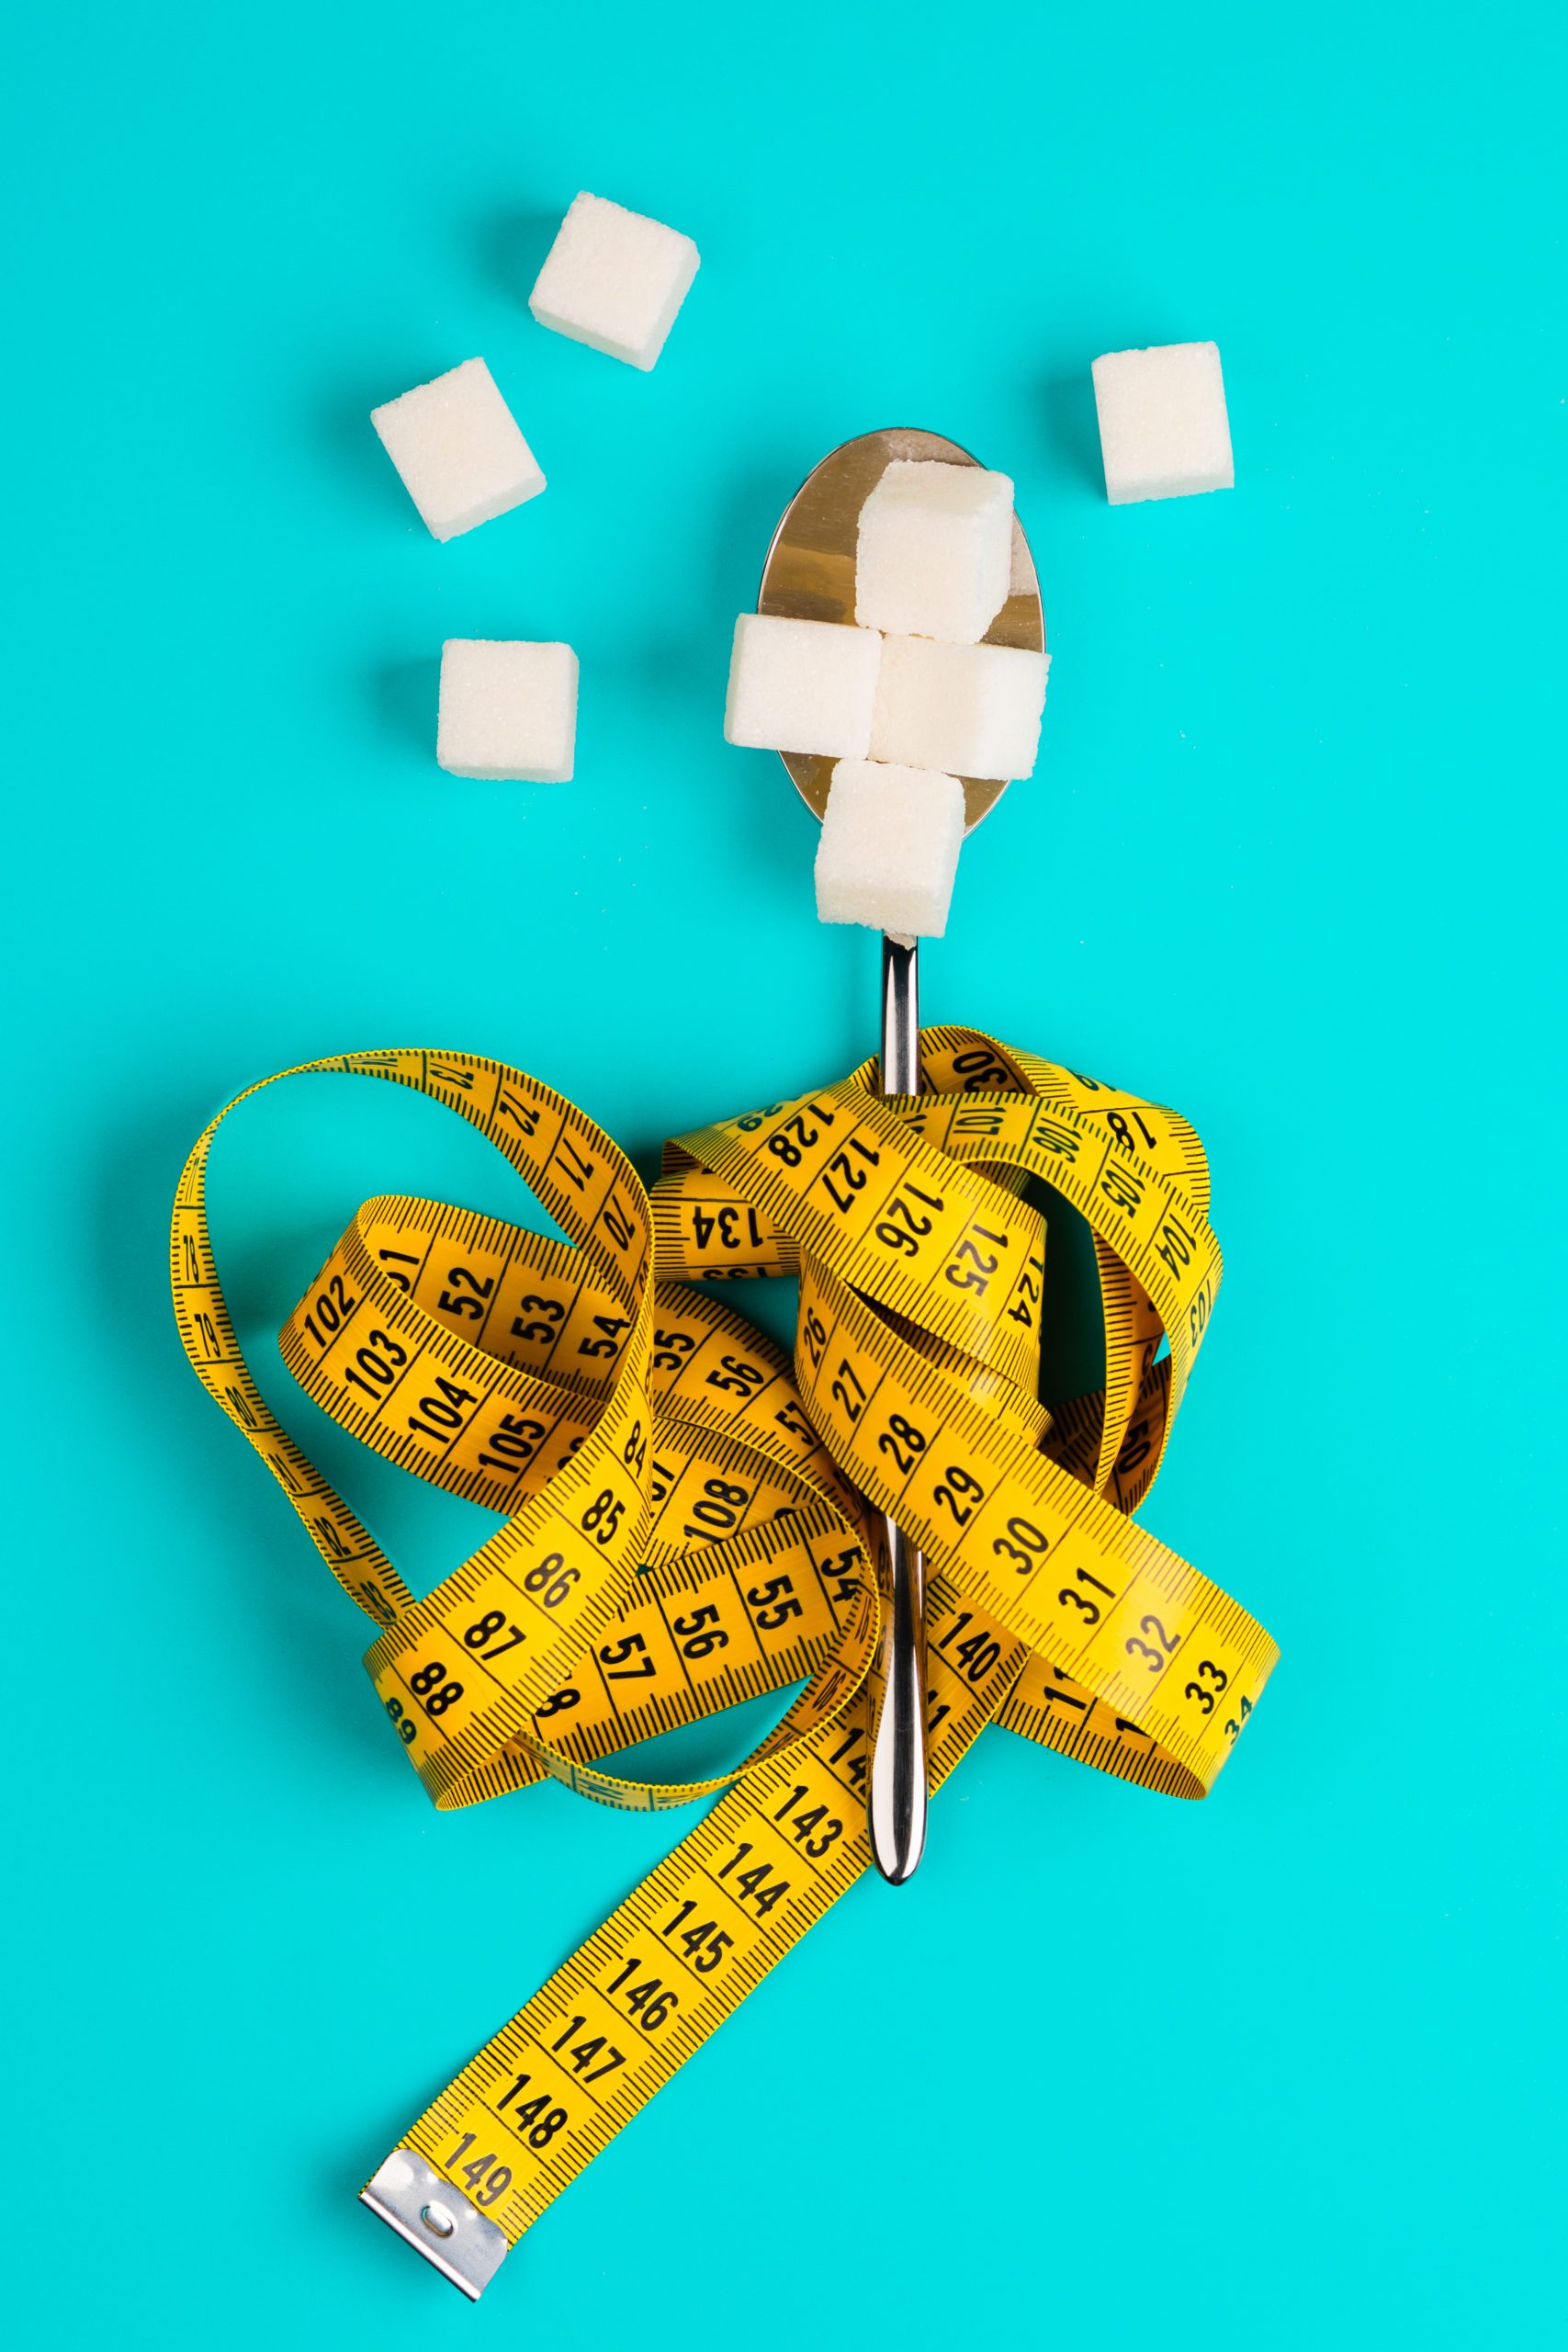 Sugar-replacing tablets or sugar with a spoon are entangled in the measuring tape. On a blue background. The concept of diabetes and proper nutrition.